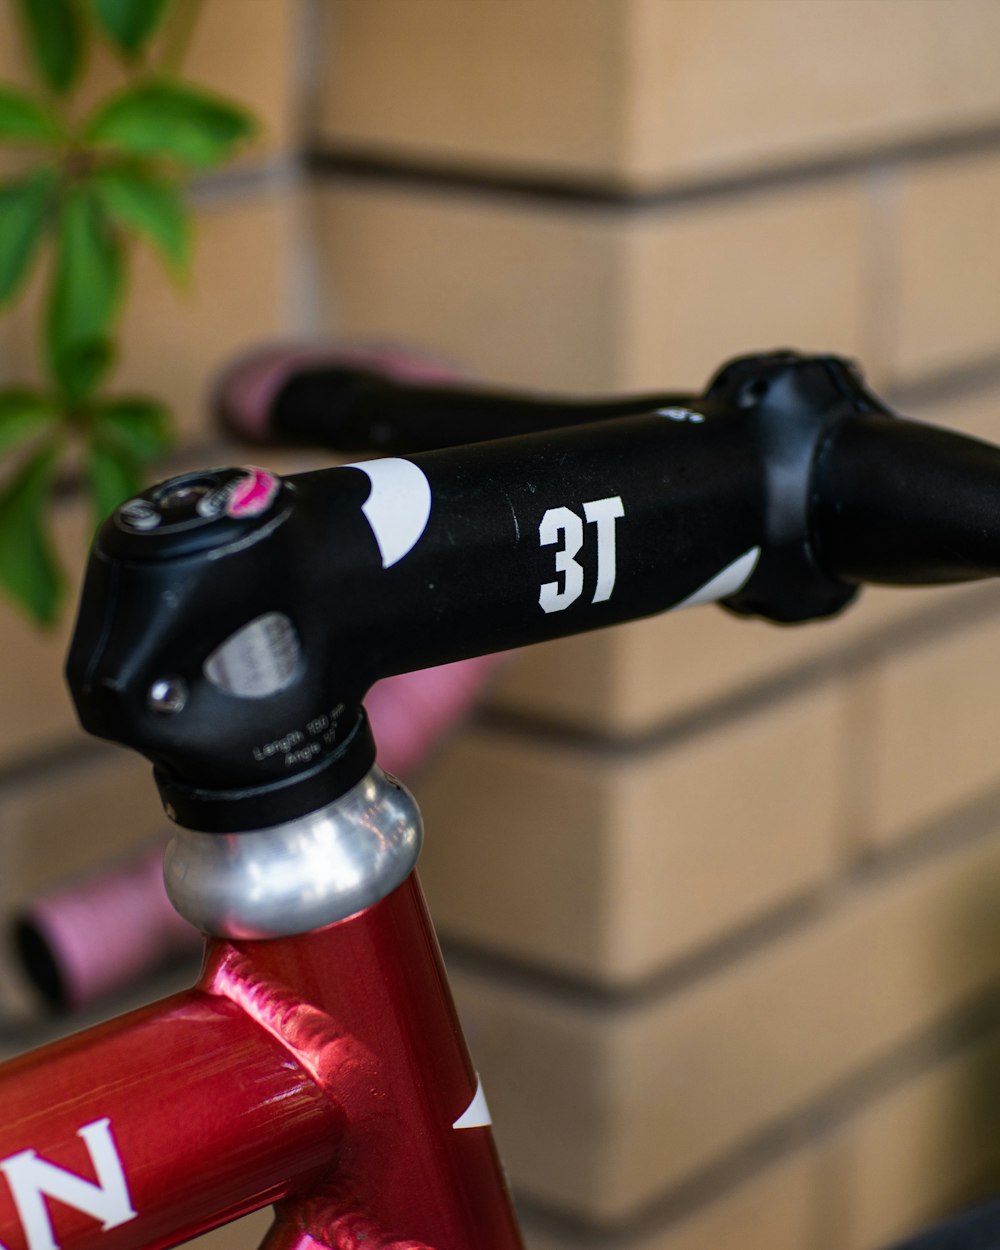 black and red bicycle handle bar